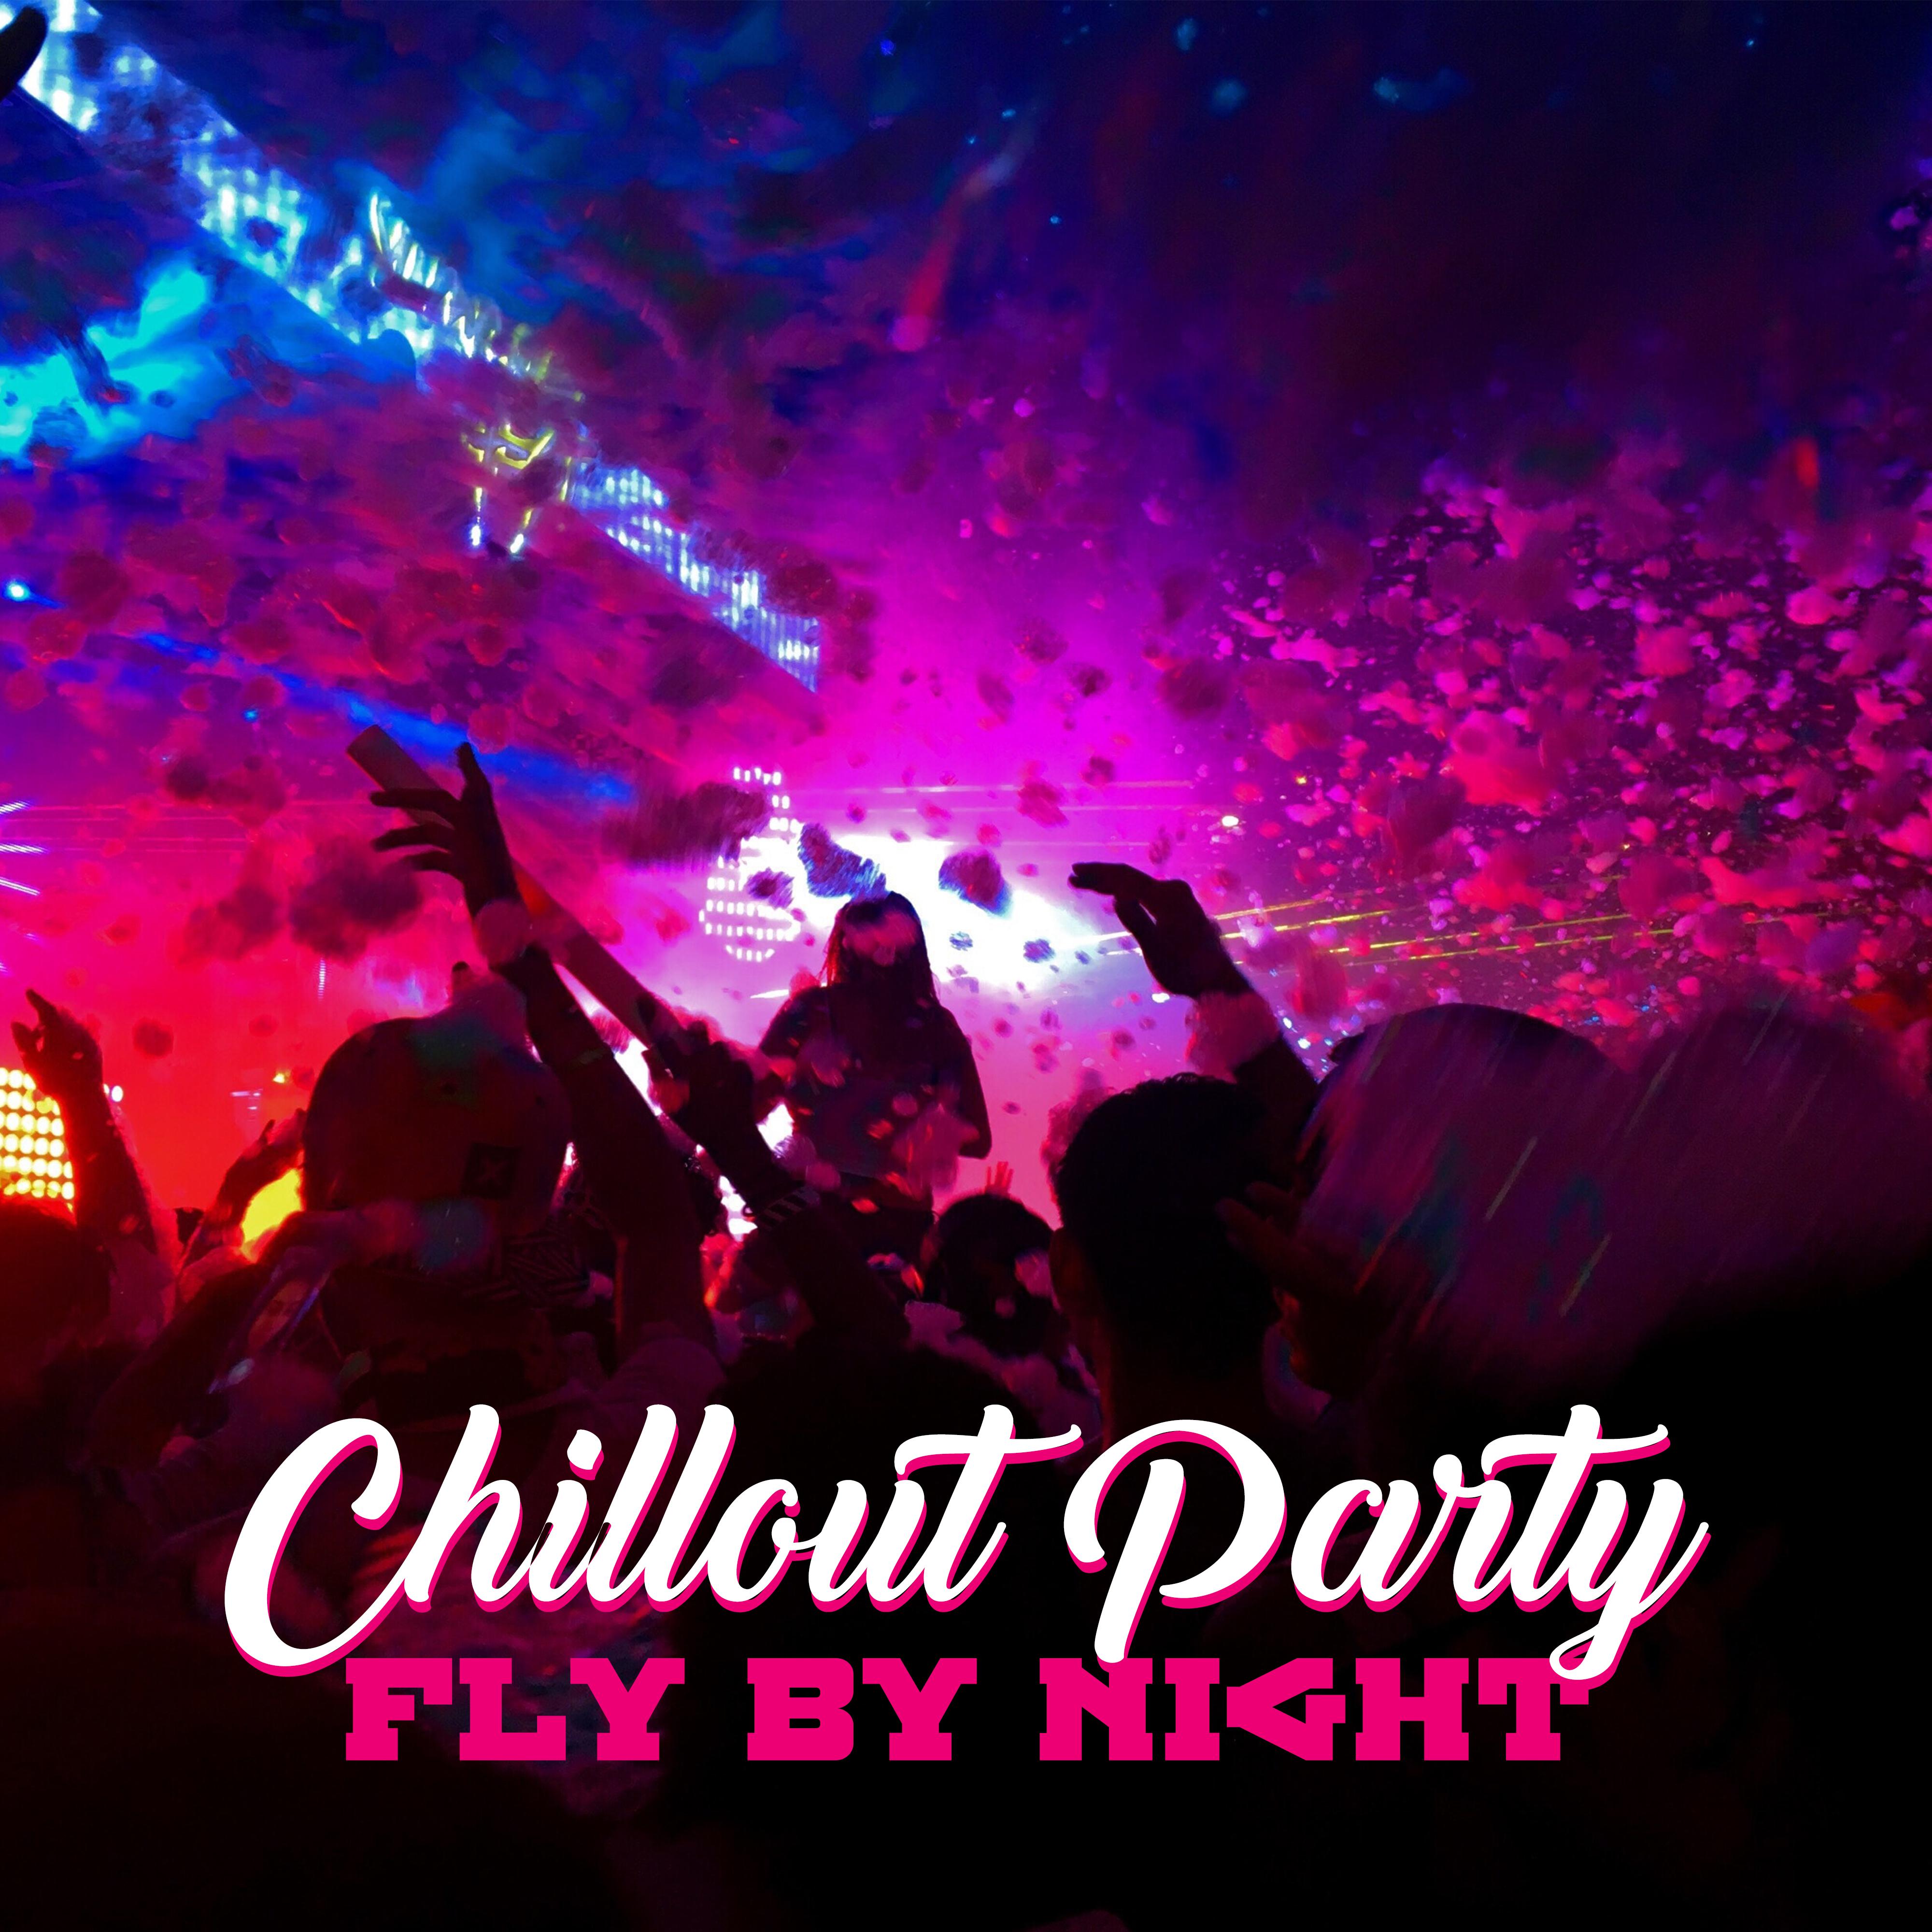 Chillout Party Fly by Night: 2019 Chill Out Club Dance Party Music Compilation, Deep Electro House, Very Gentle Vibes, Pumping Beats